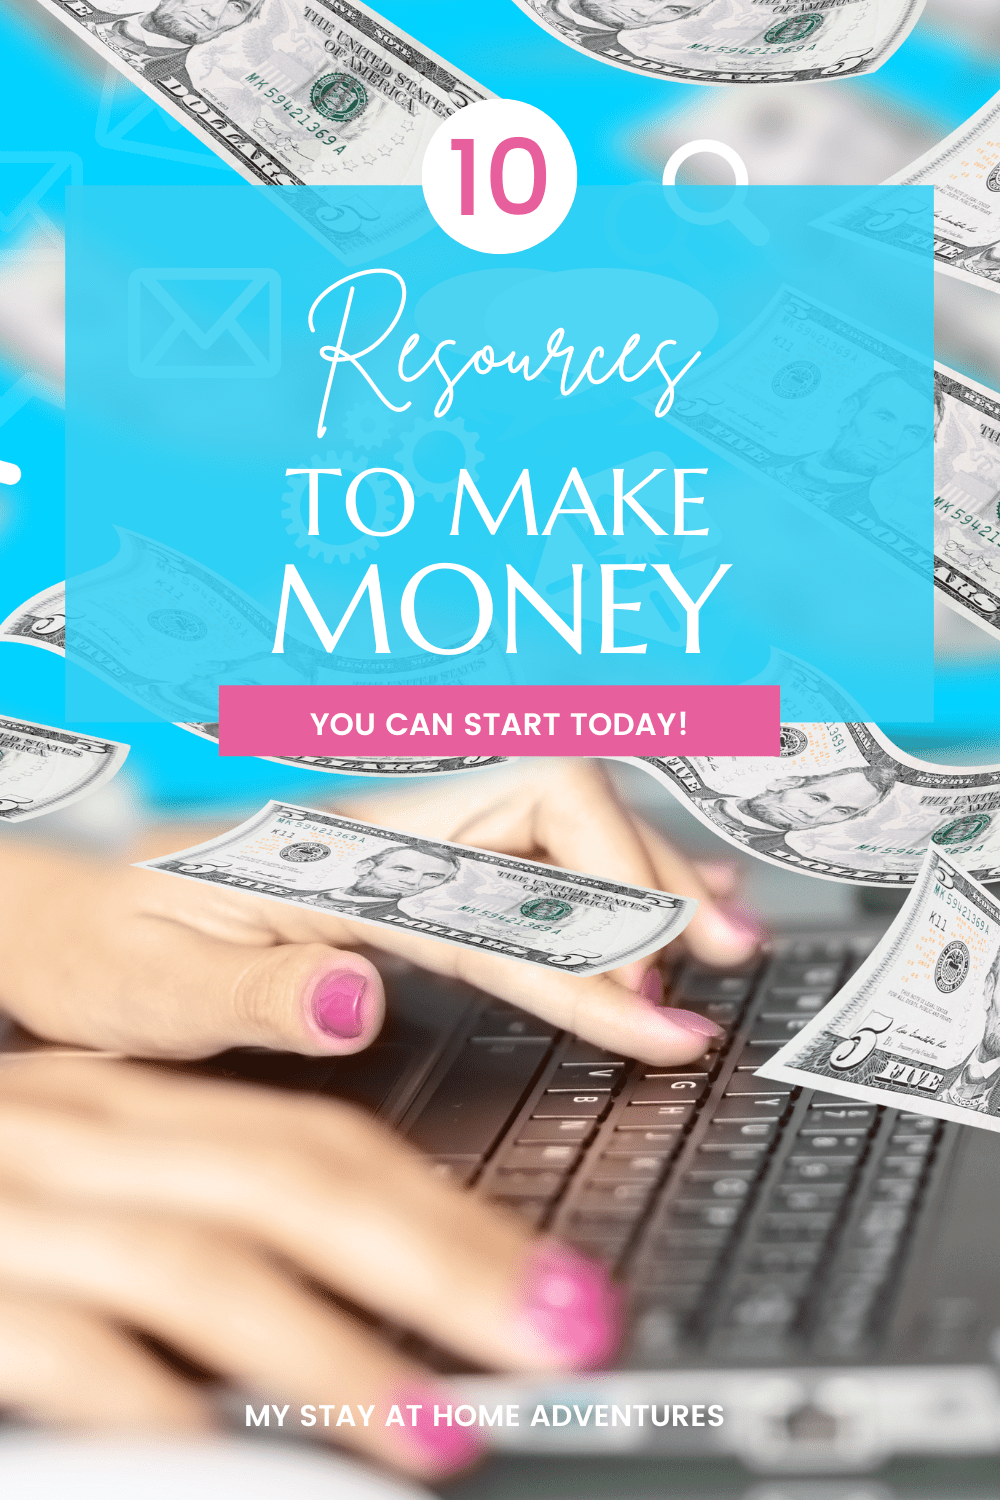 Don't wait – these resources can help you start earning money right away! We've gathered some of the best tips and tricks for making extra cash. via @mystayathome